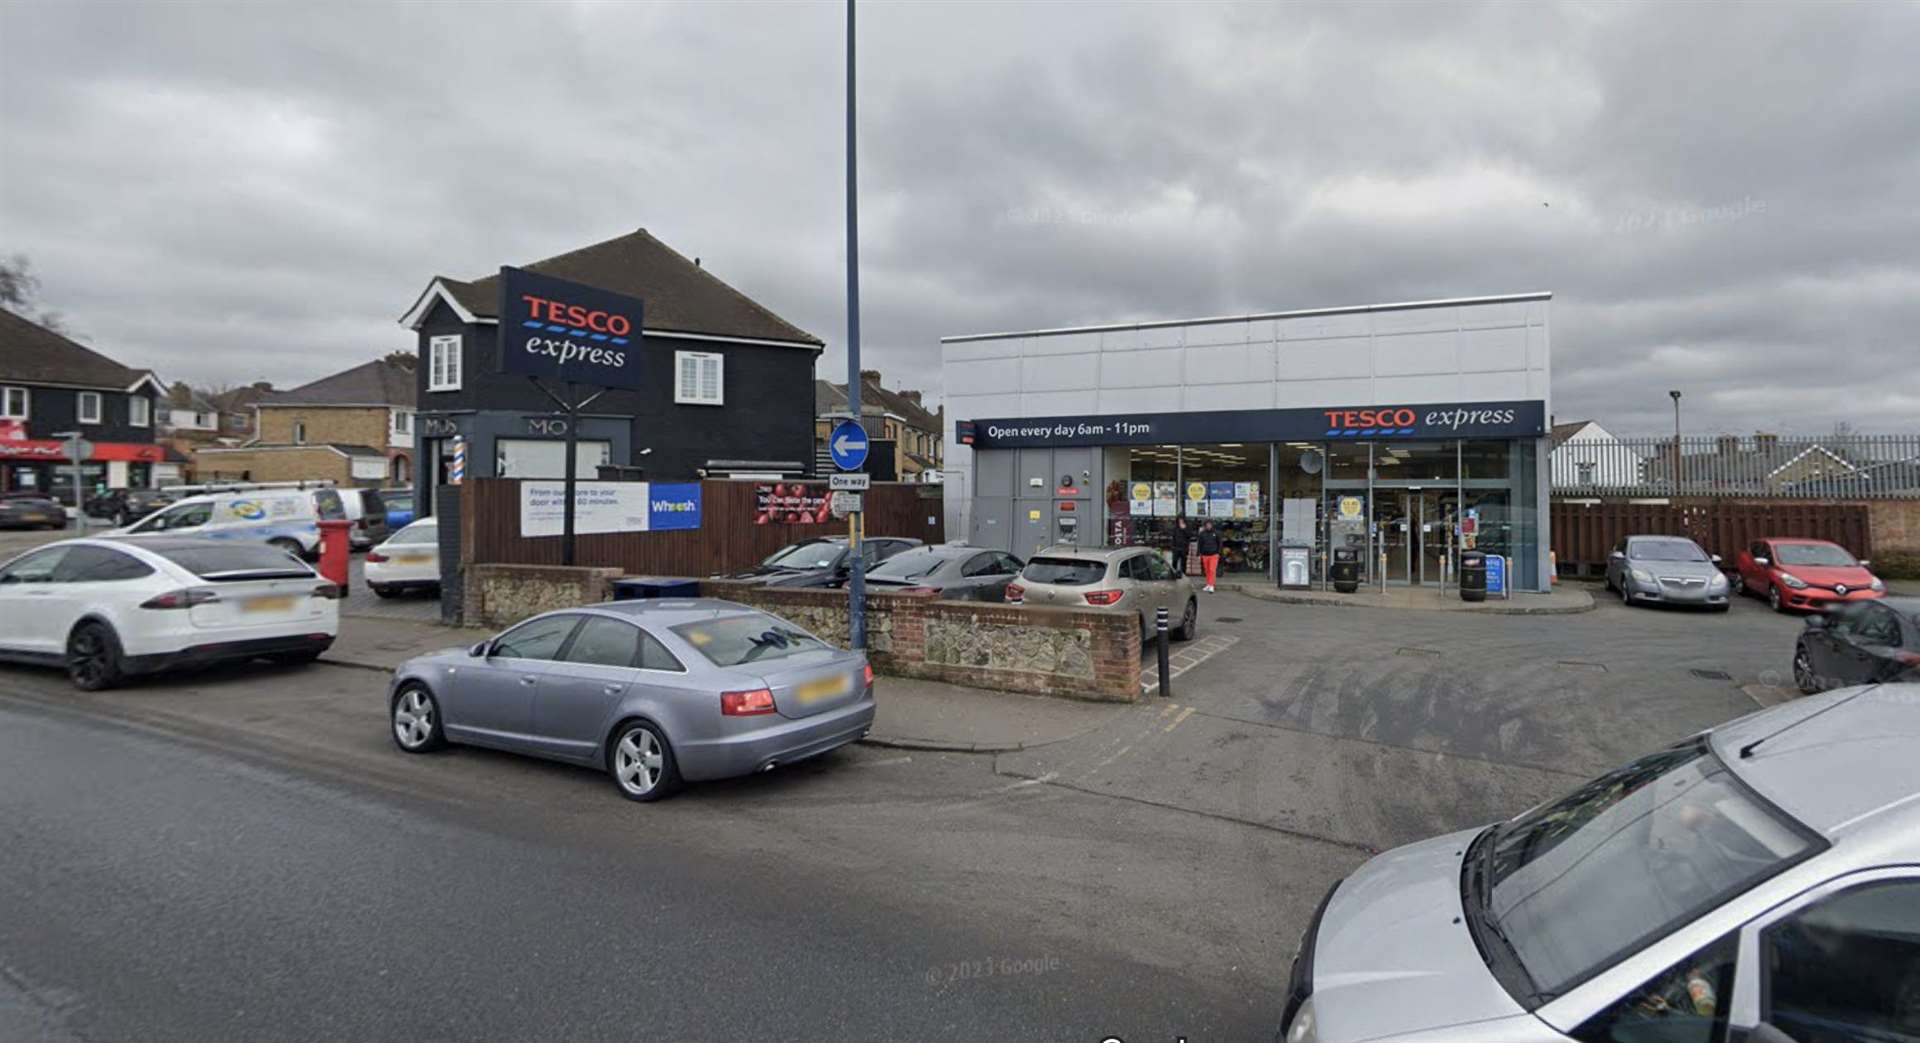 Employees have also been allegedly assaulted in Tesco in Loose Road, Maidstone. Picture: Google